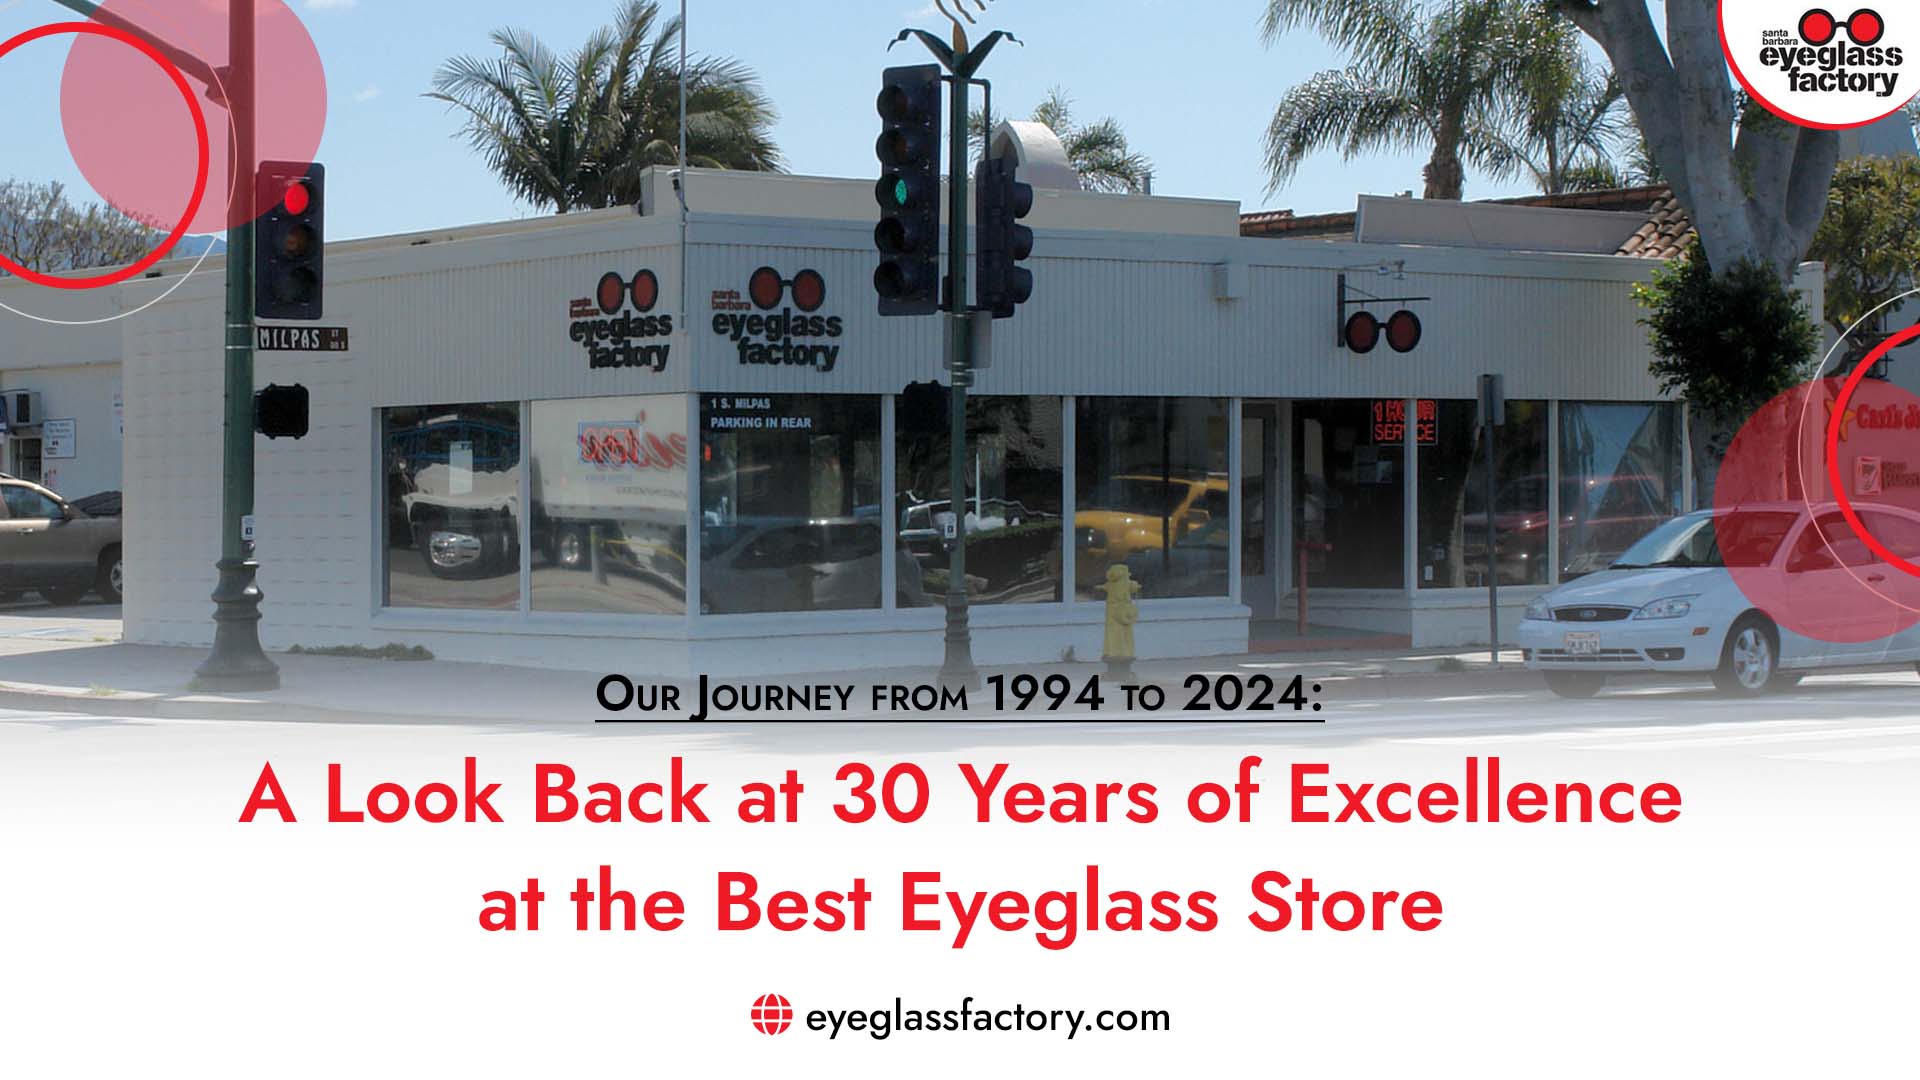 30 Years of Excellence at the Best Eyeglass Store